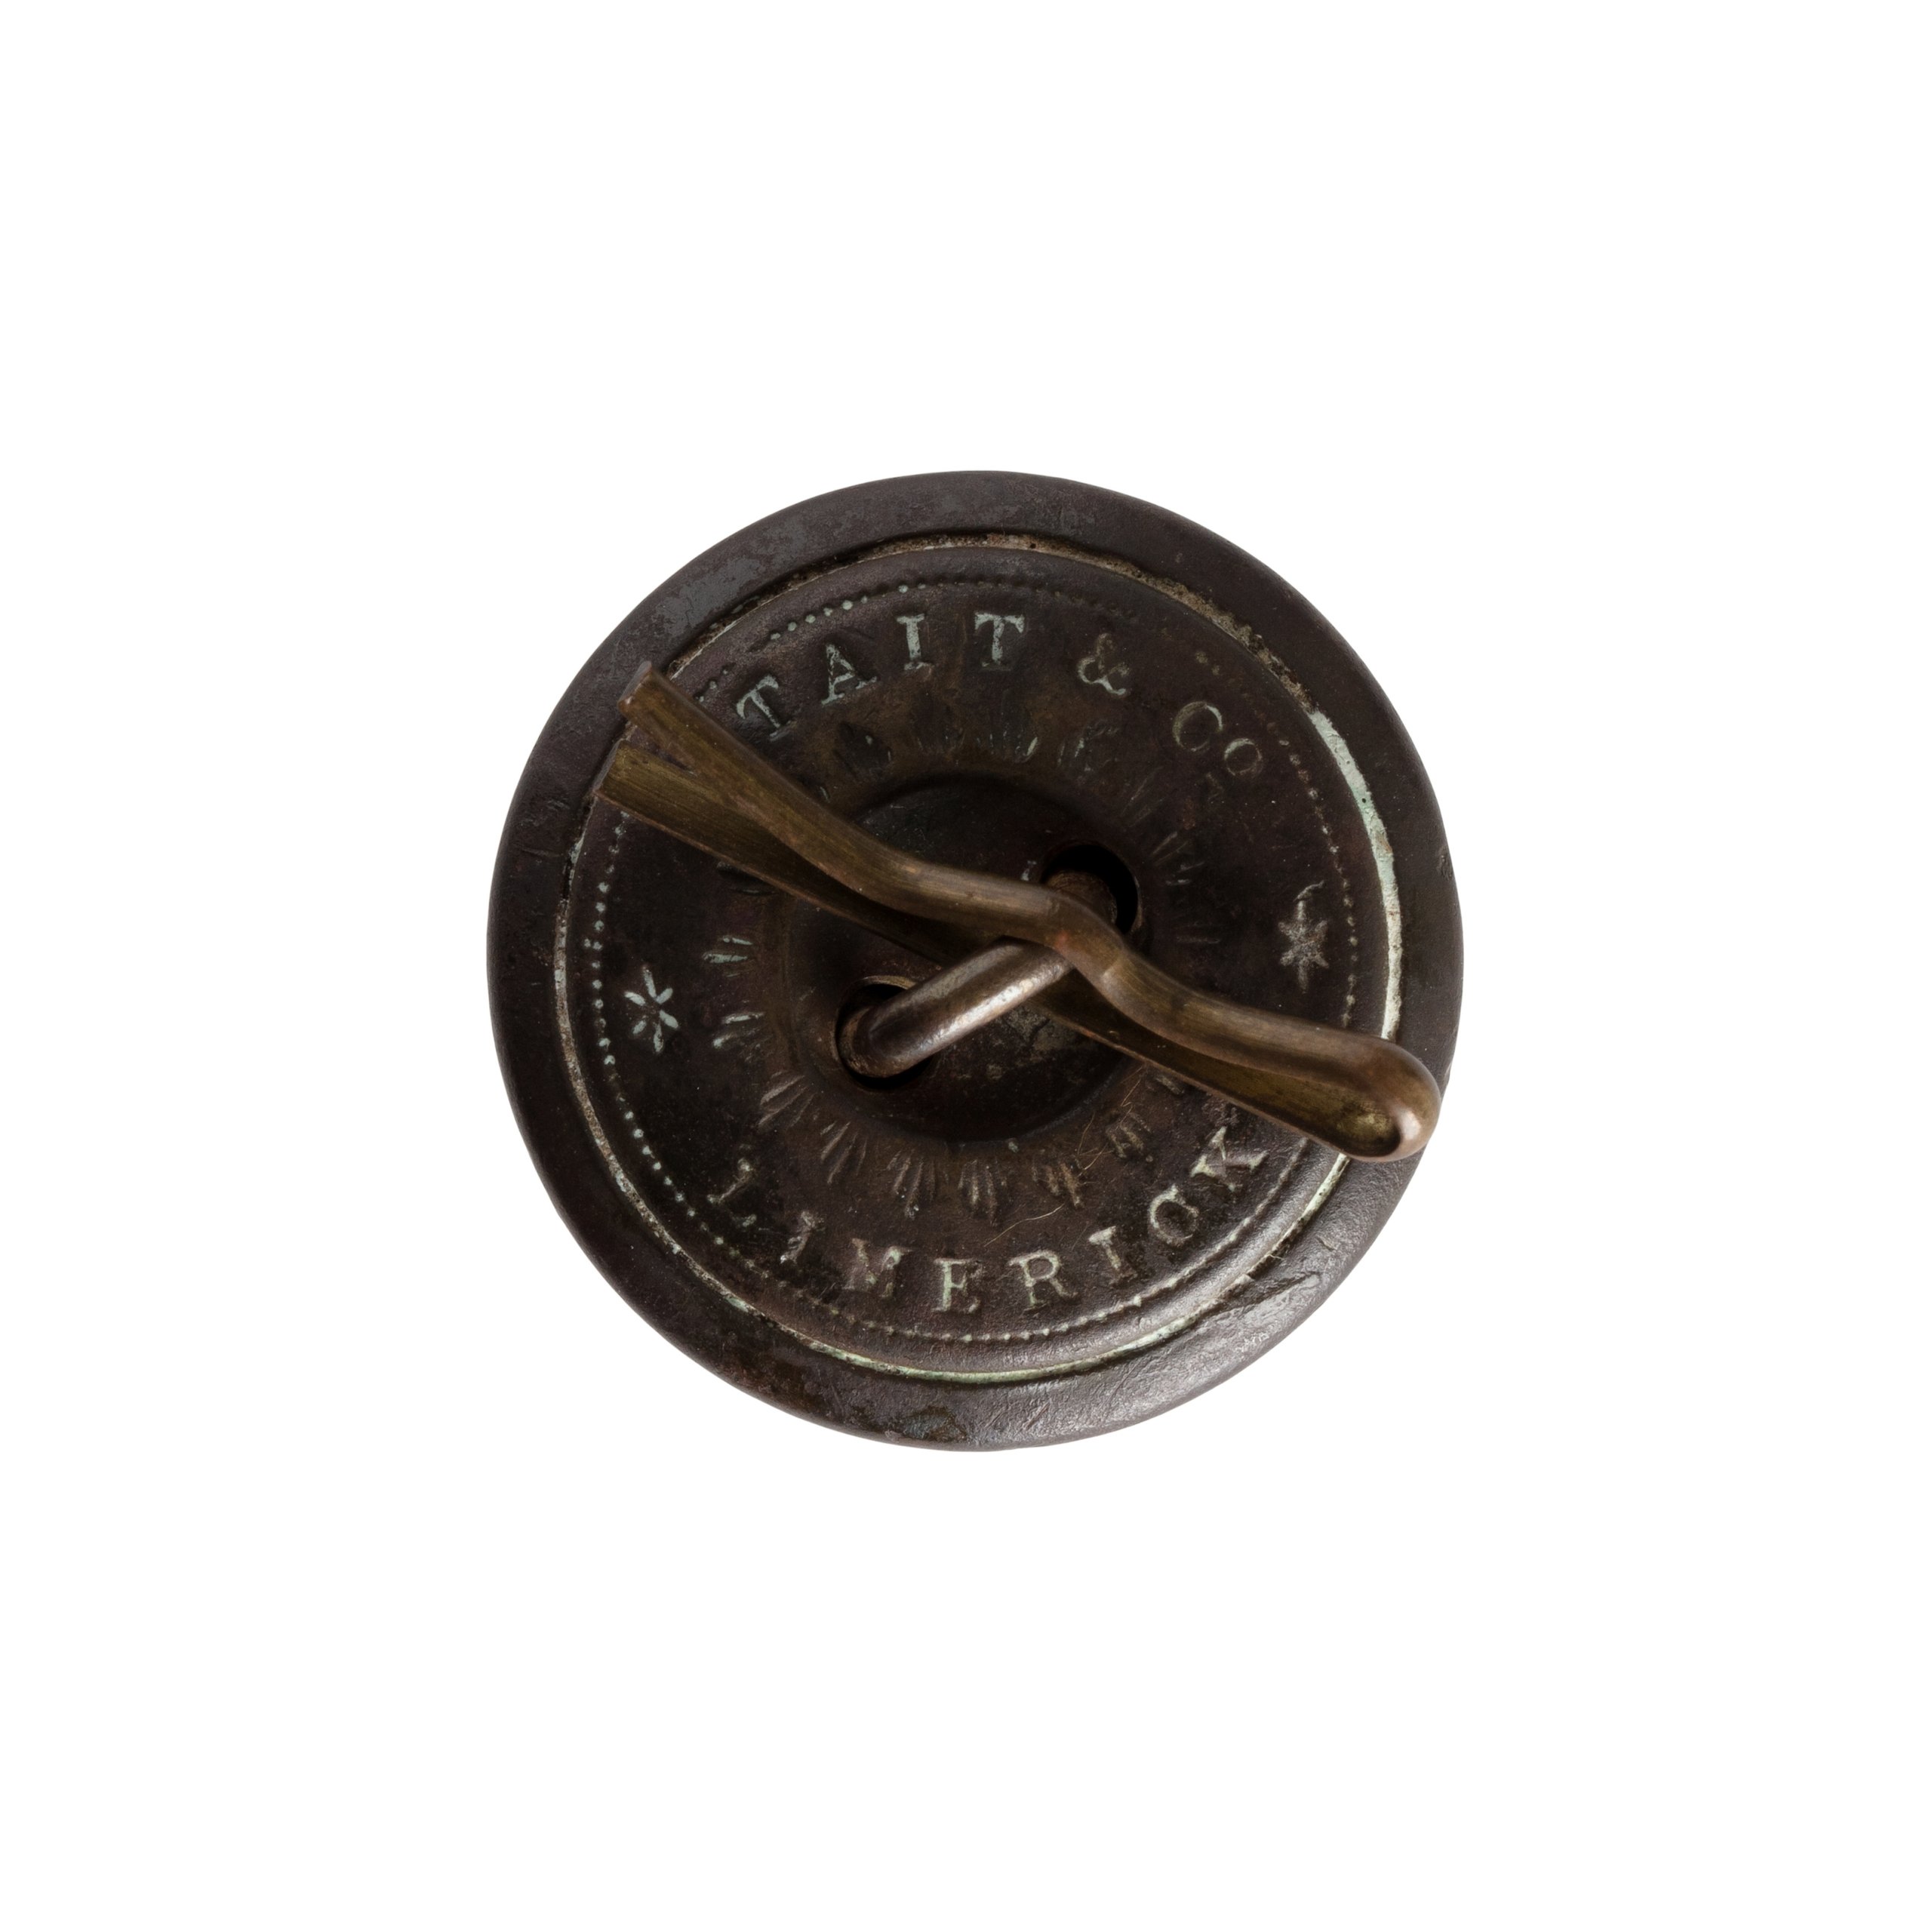 British Army button and clip